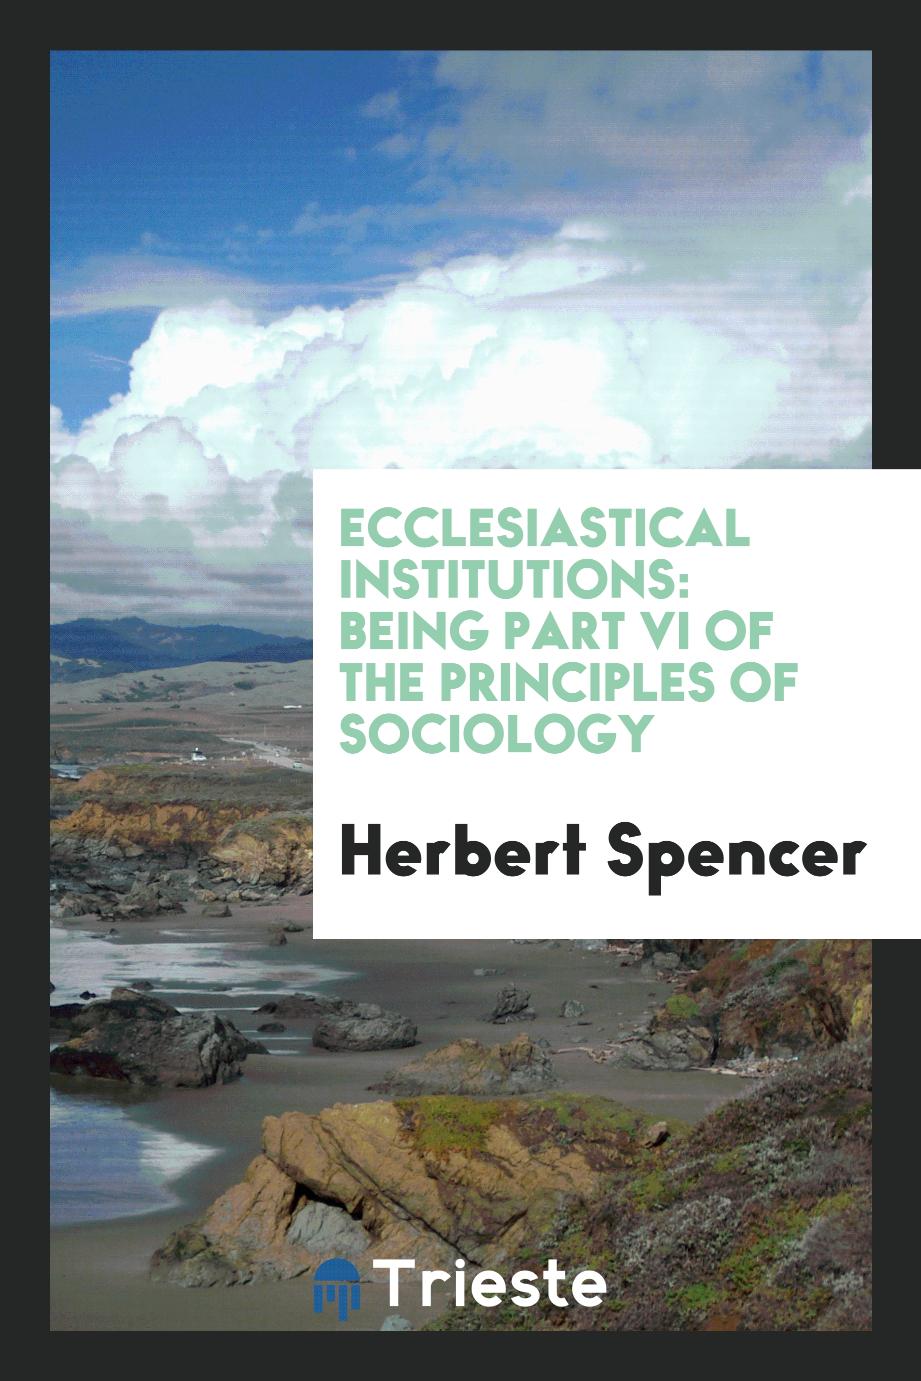 Ecclesiastical institutions: being part VI of the principles of sociology